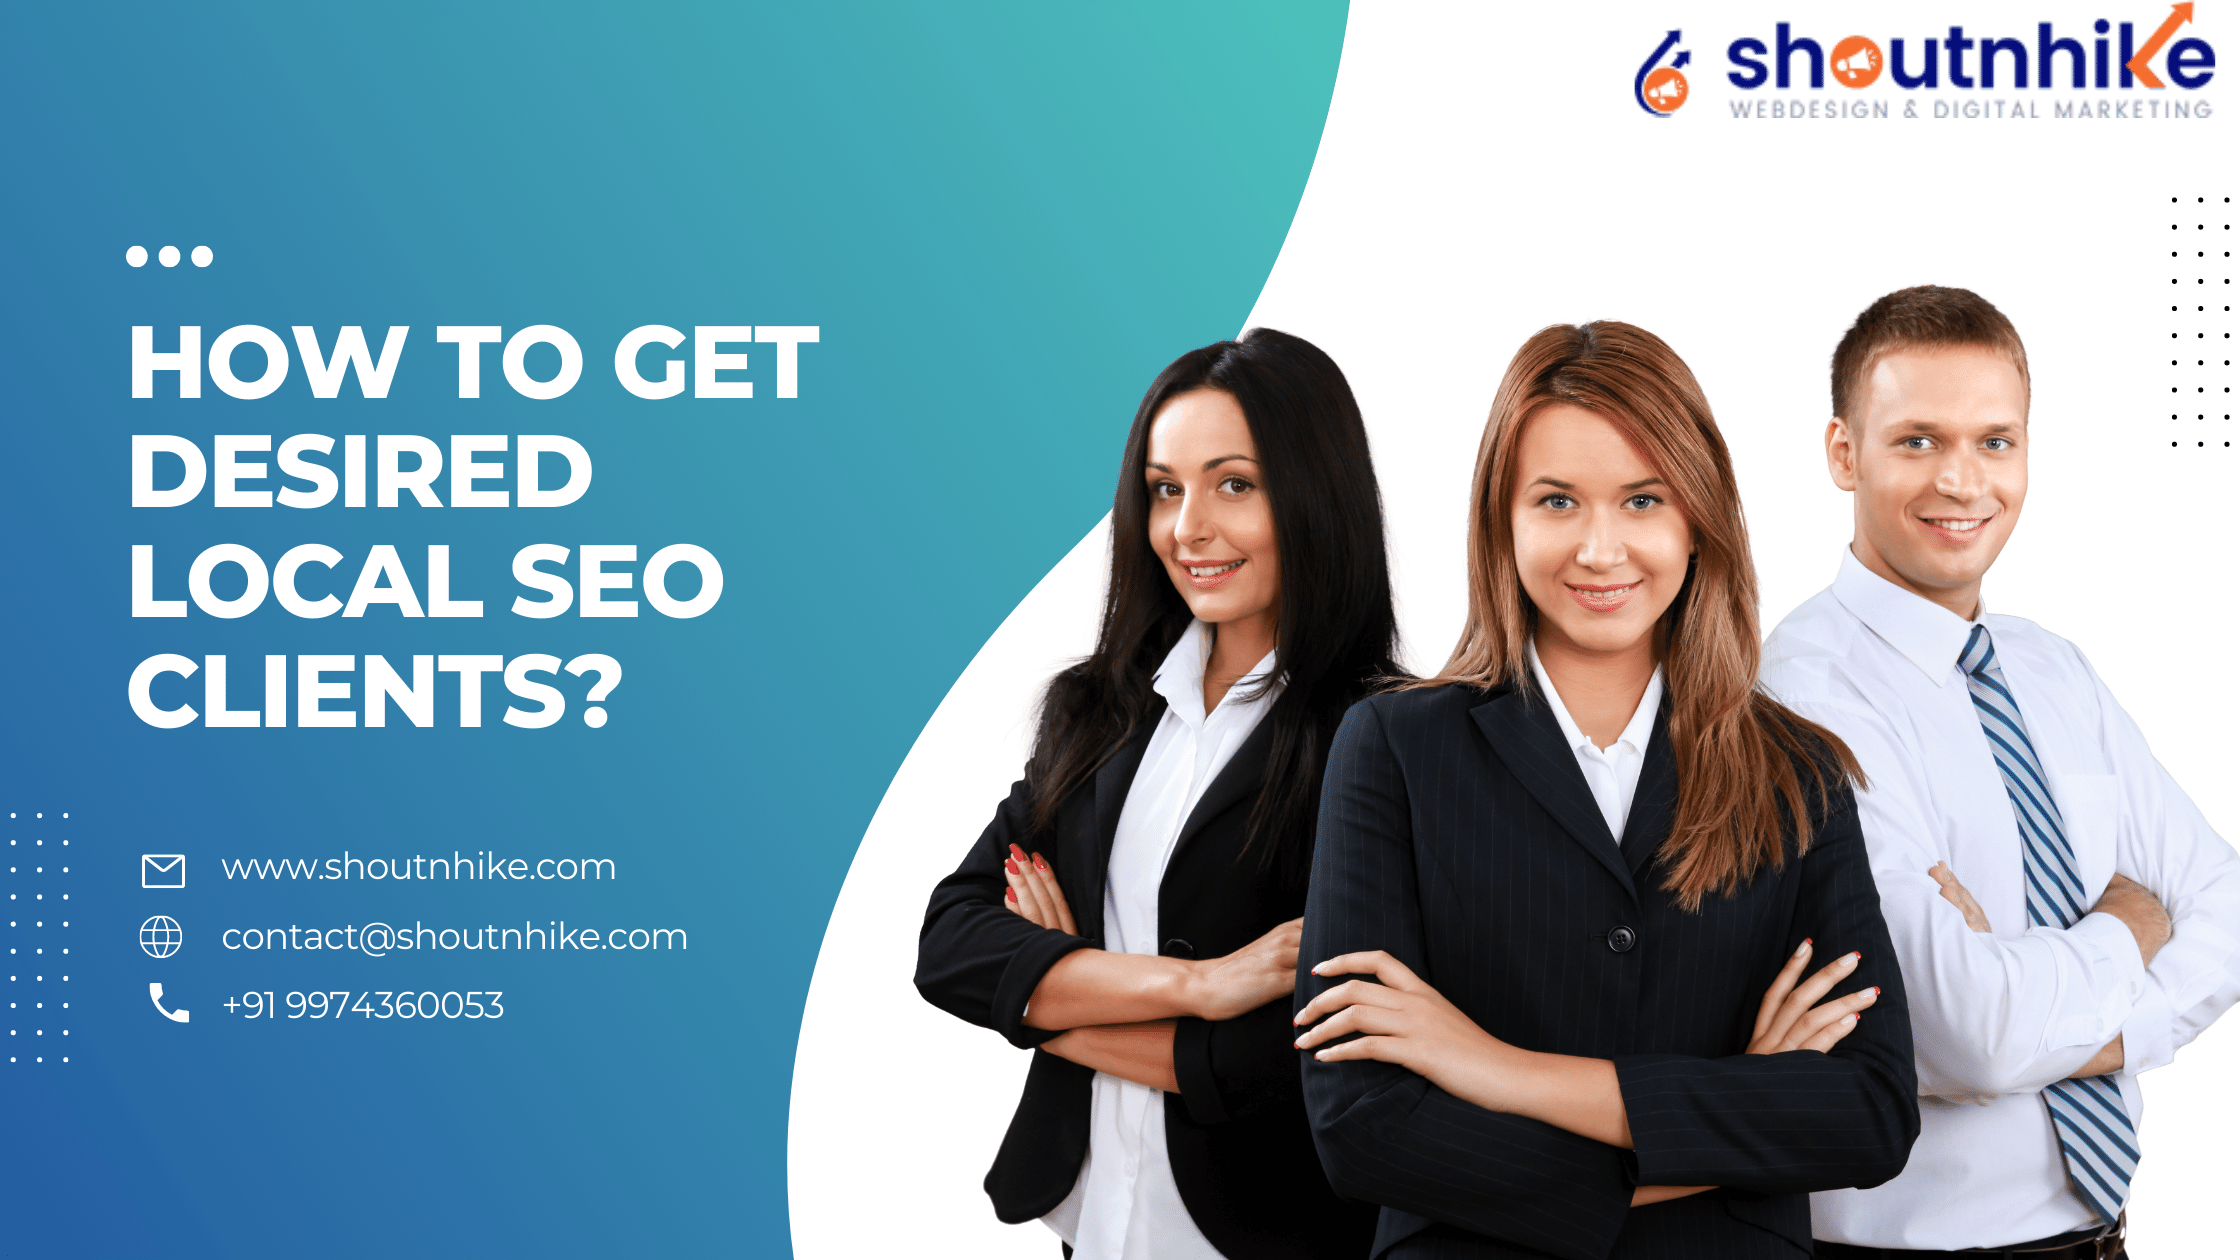 How to Get Desired Local SEO Clients